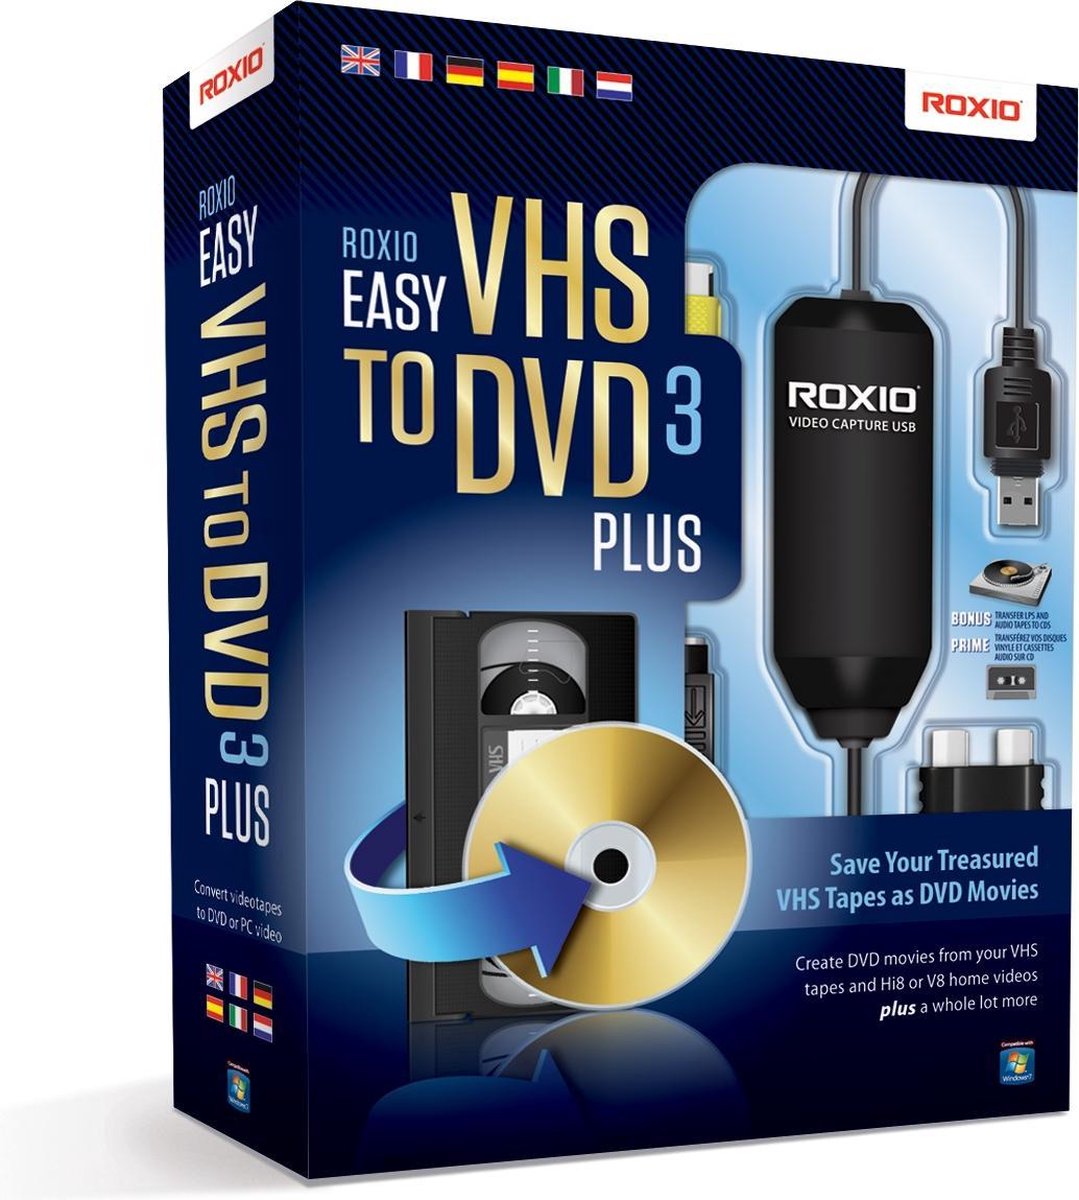 download roxio easy vhs to dvd 3 plus